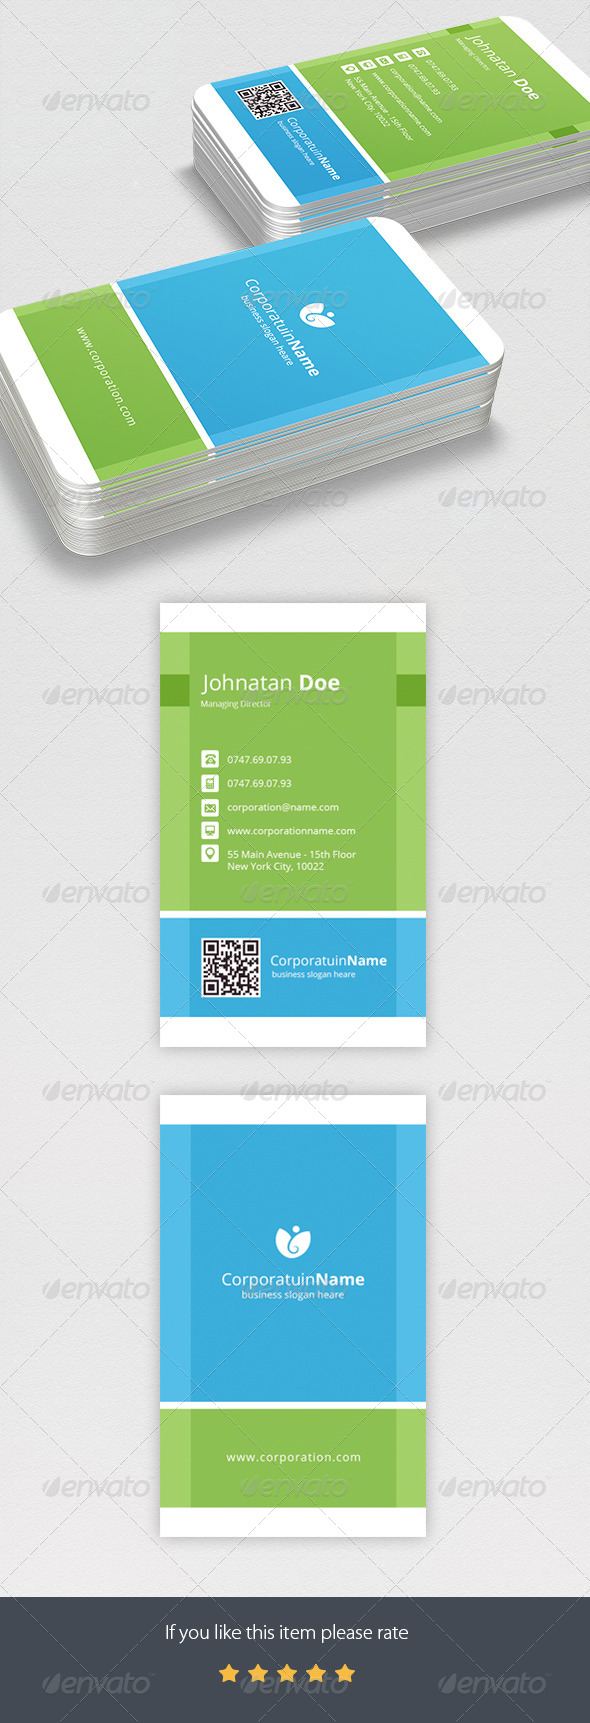 GraphicRiver Corporate Business Card 7668681